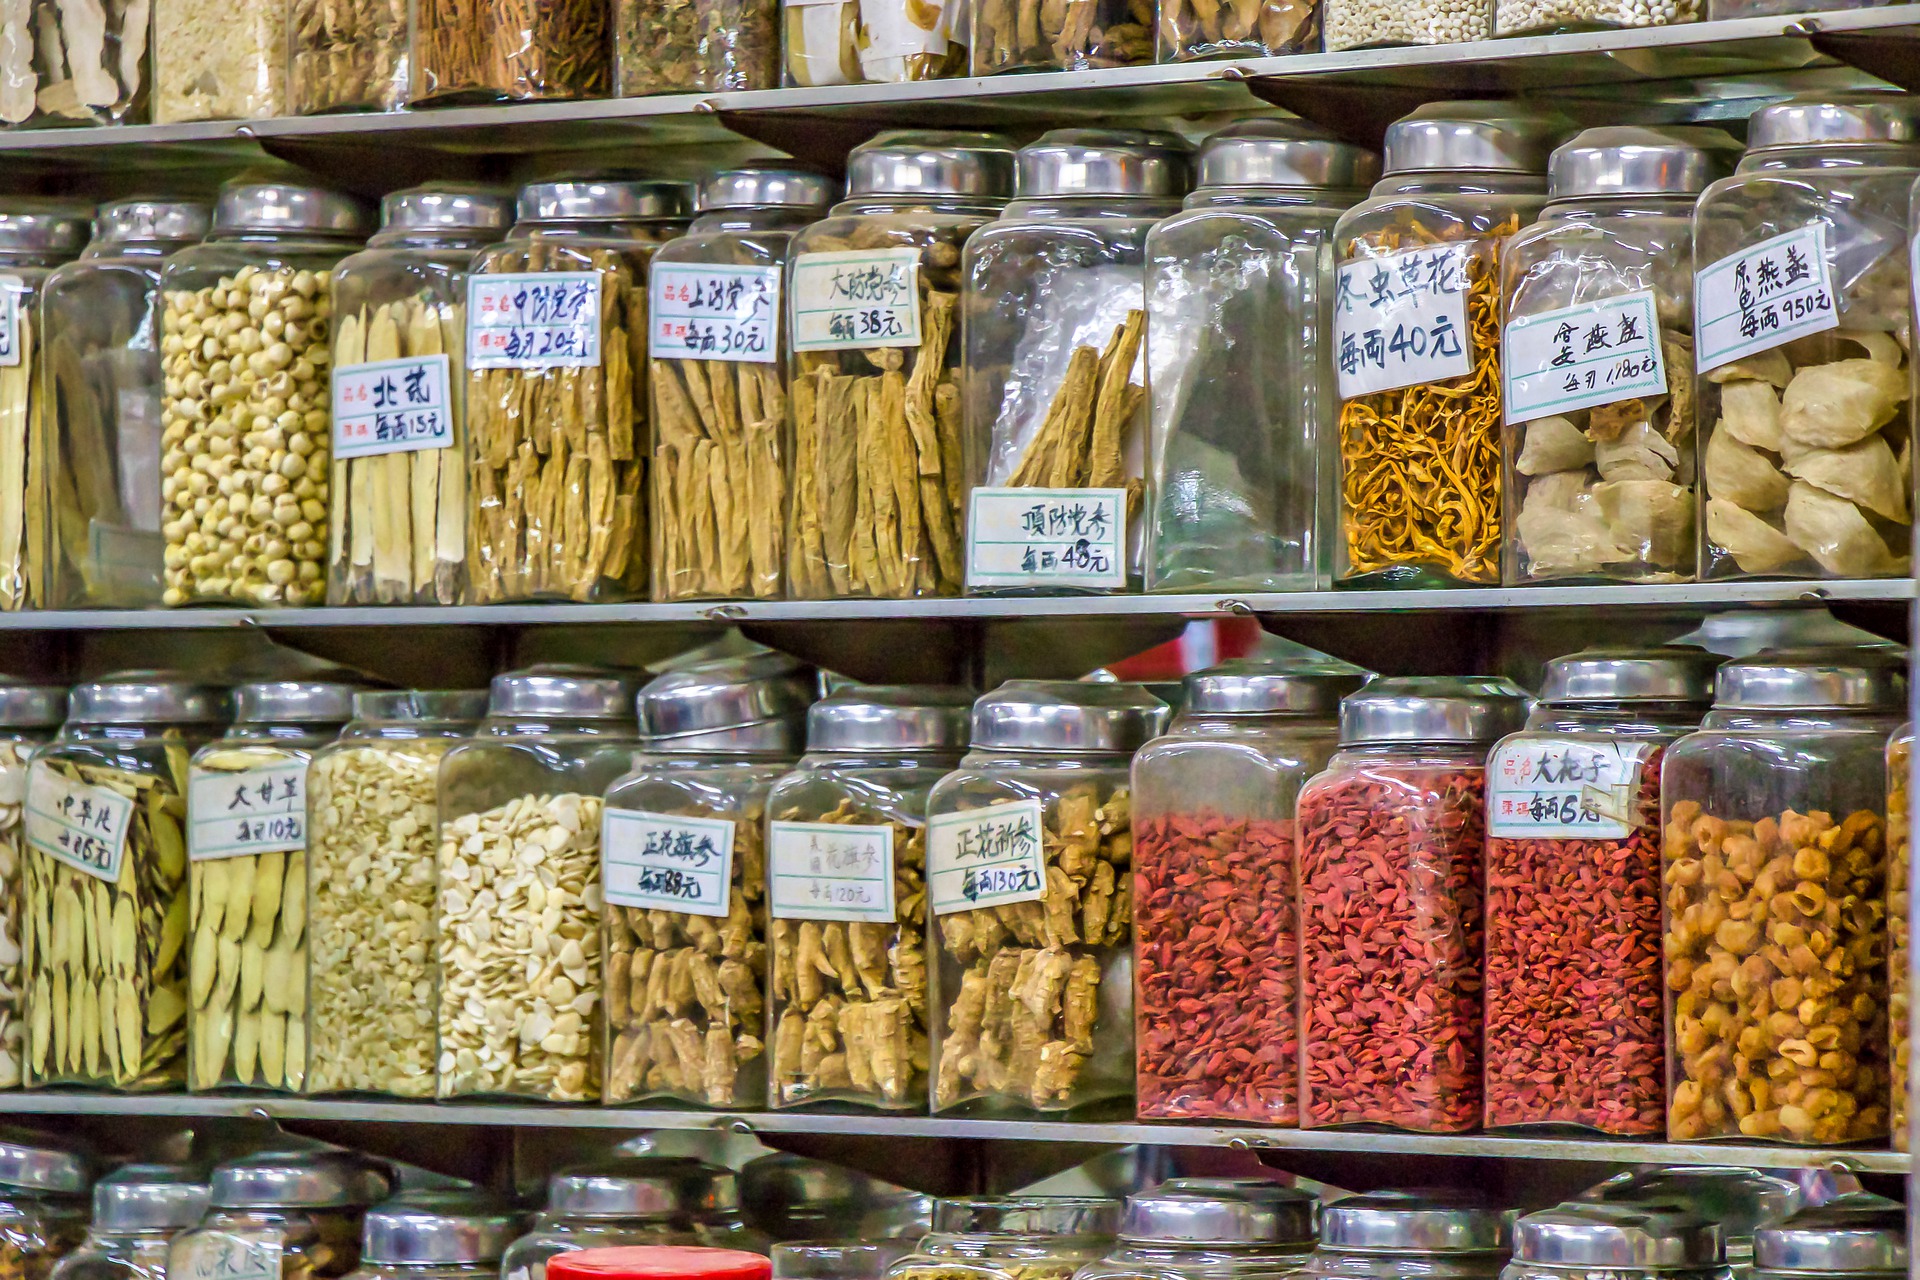 Shelves lined with labeled glass jars containing various dried herbs, roots, and seeds in a traditional Chinese Medicine shop in NE Portland.